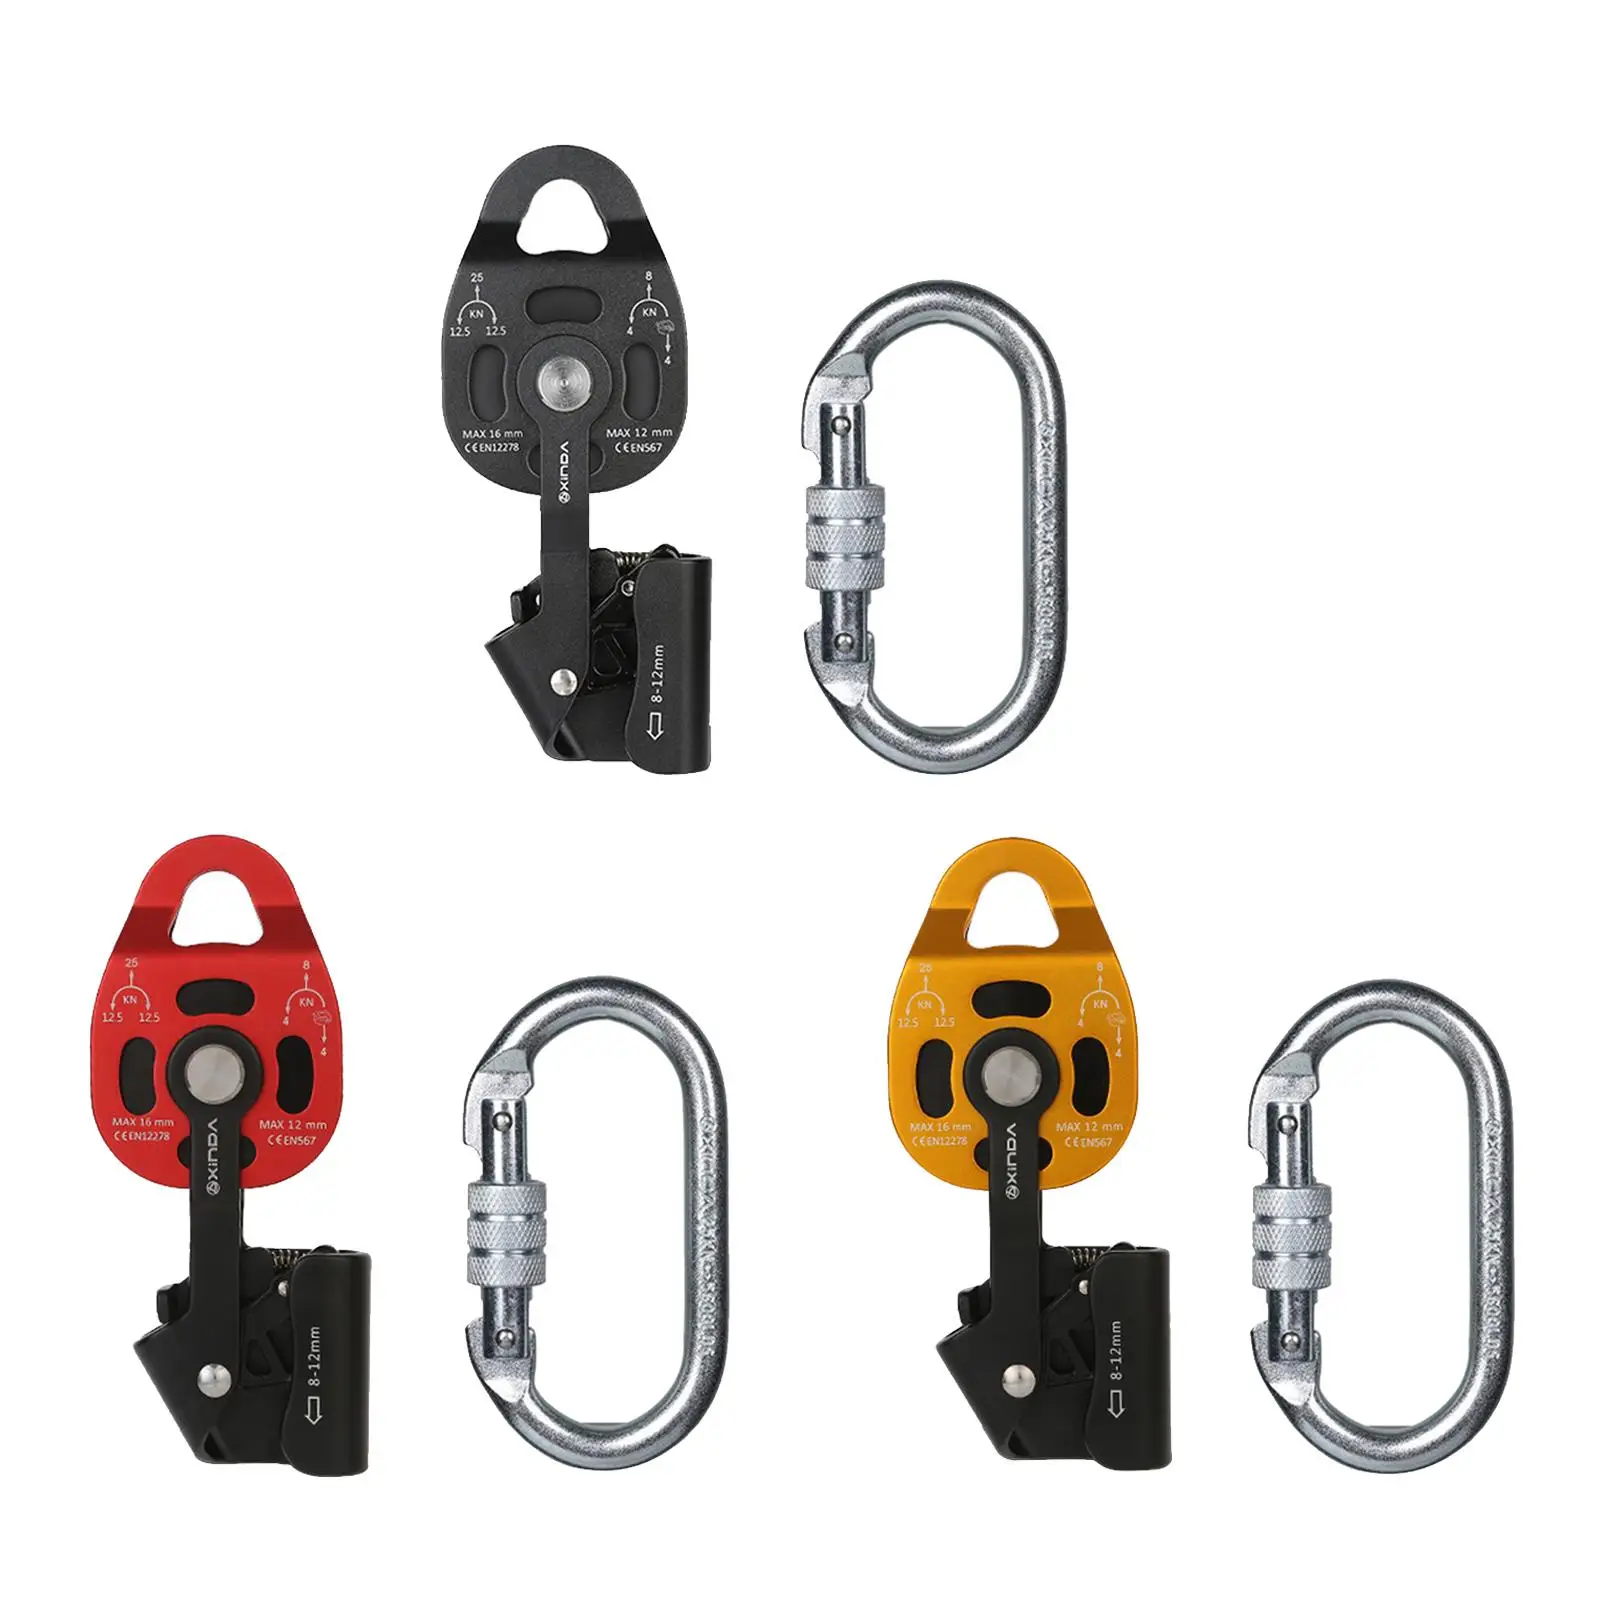 25KN Hauling Pulley Lifting Prusik Pulley Block Heavy-Duty Tackle for 12mm Rock Climbing Rope with Carabiner Clasp